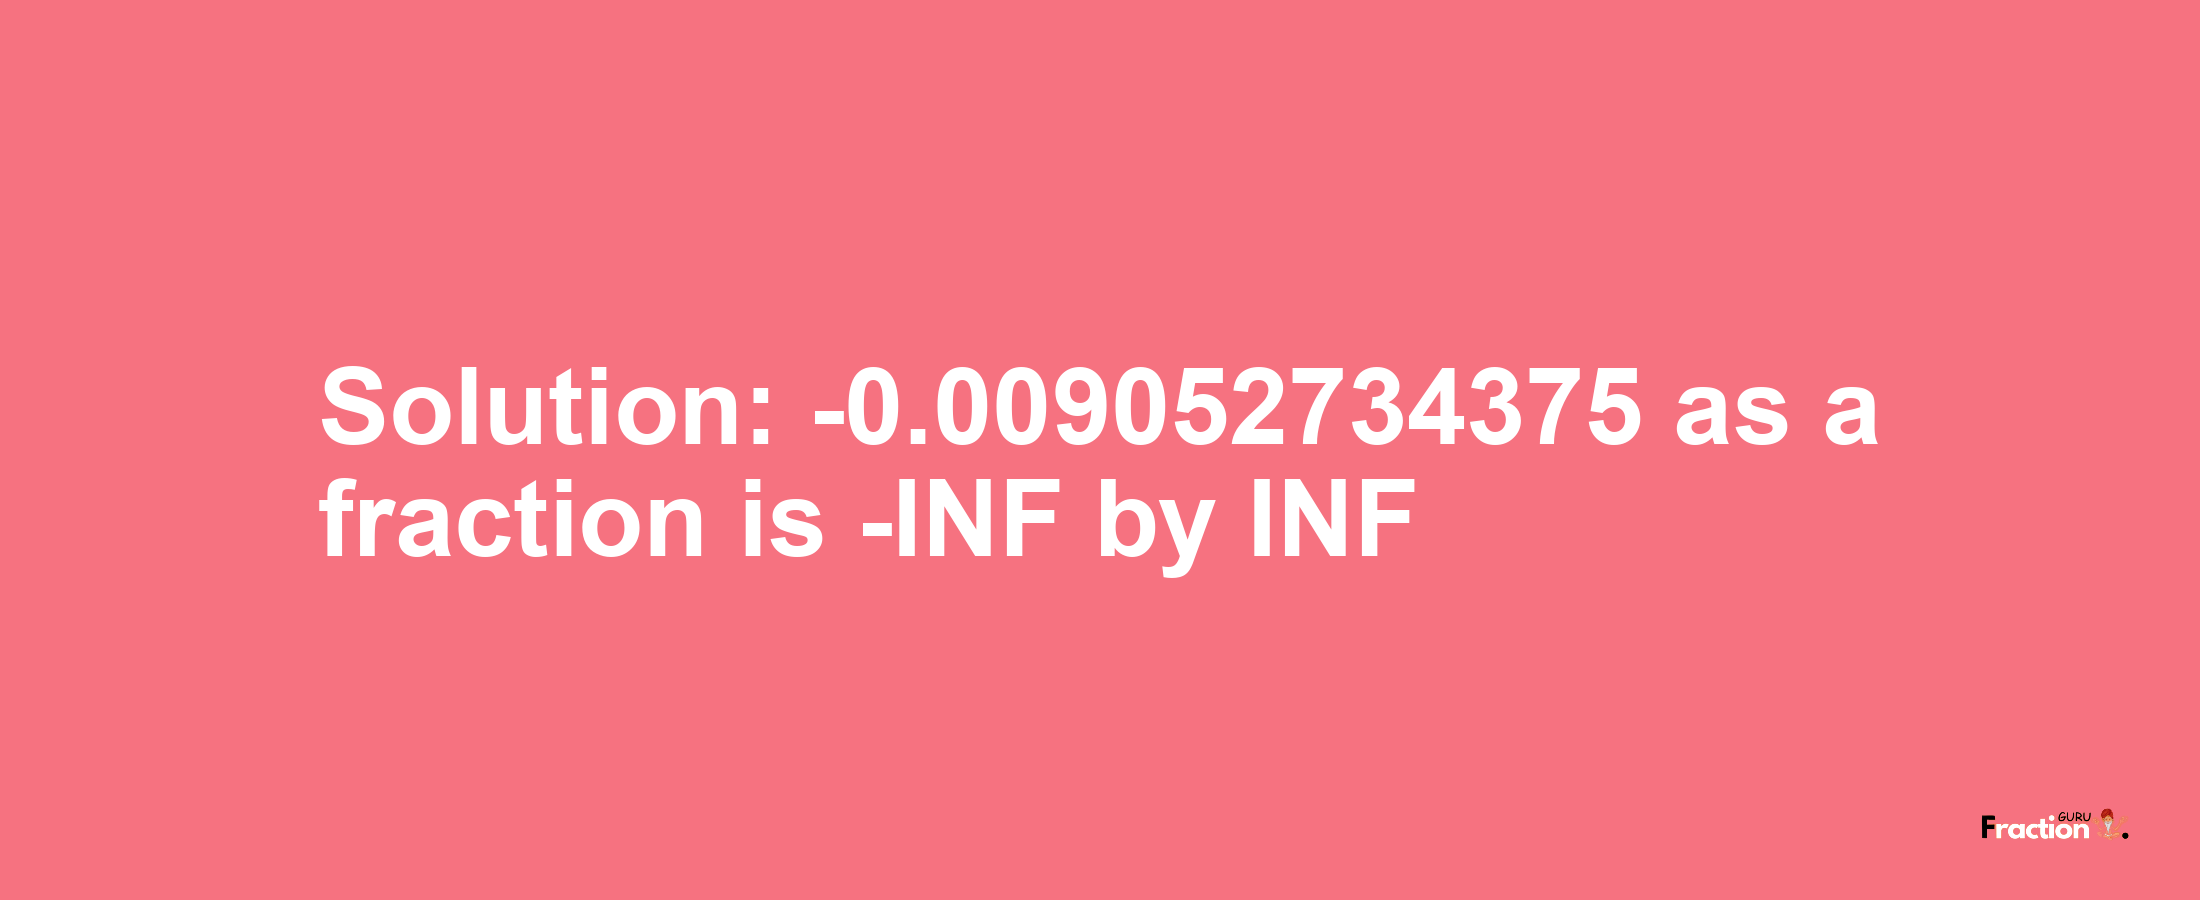 Solution:-0.009052734375 as a fraction is -INF/INF